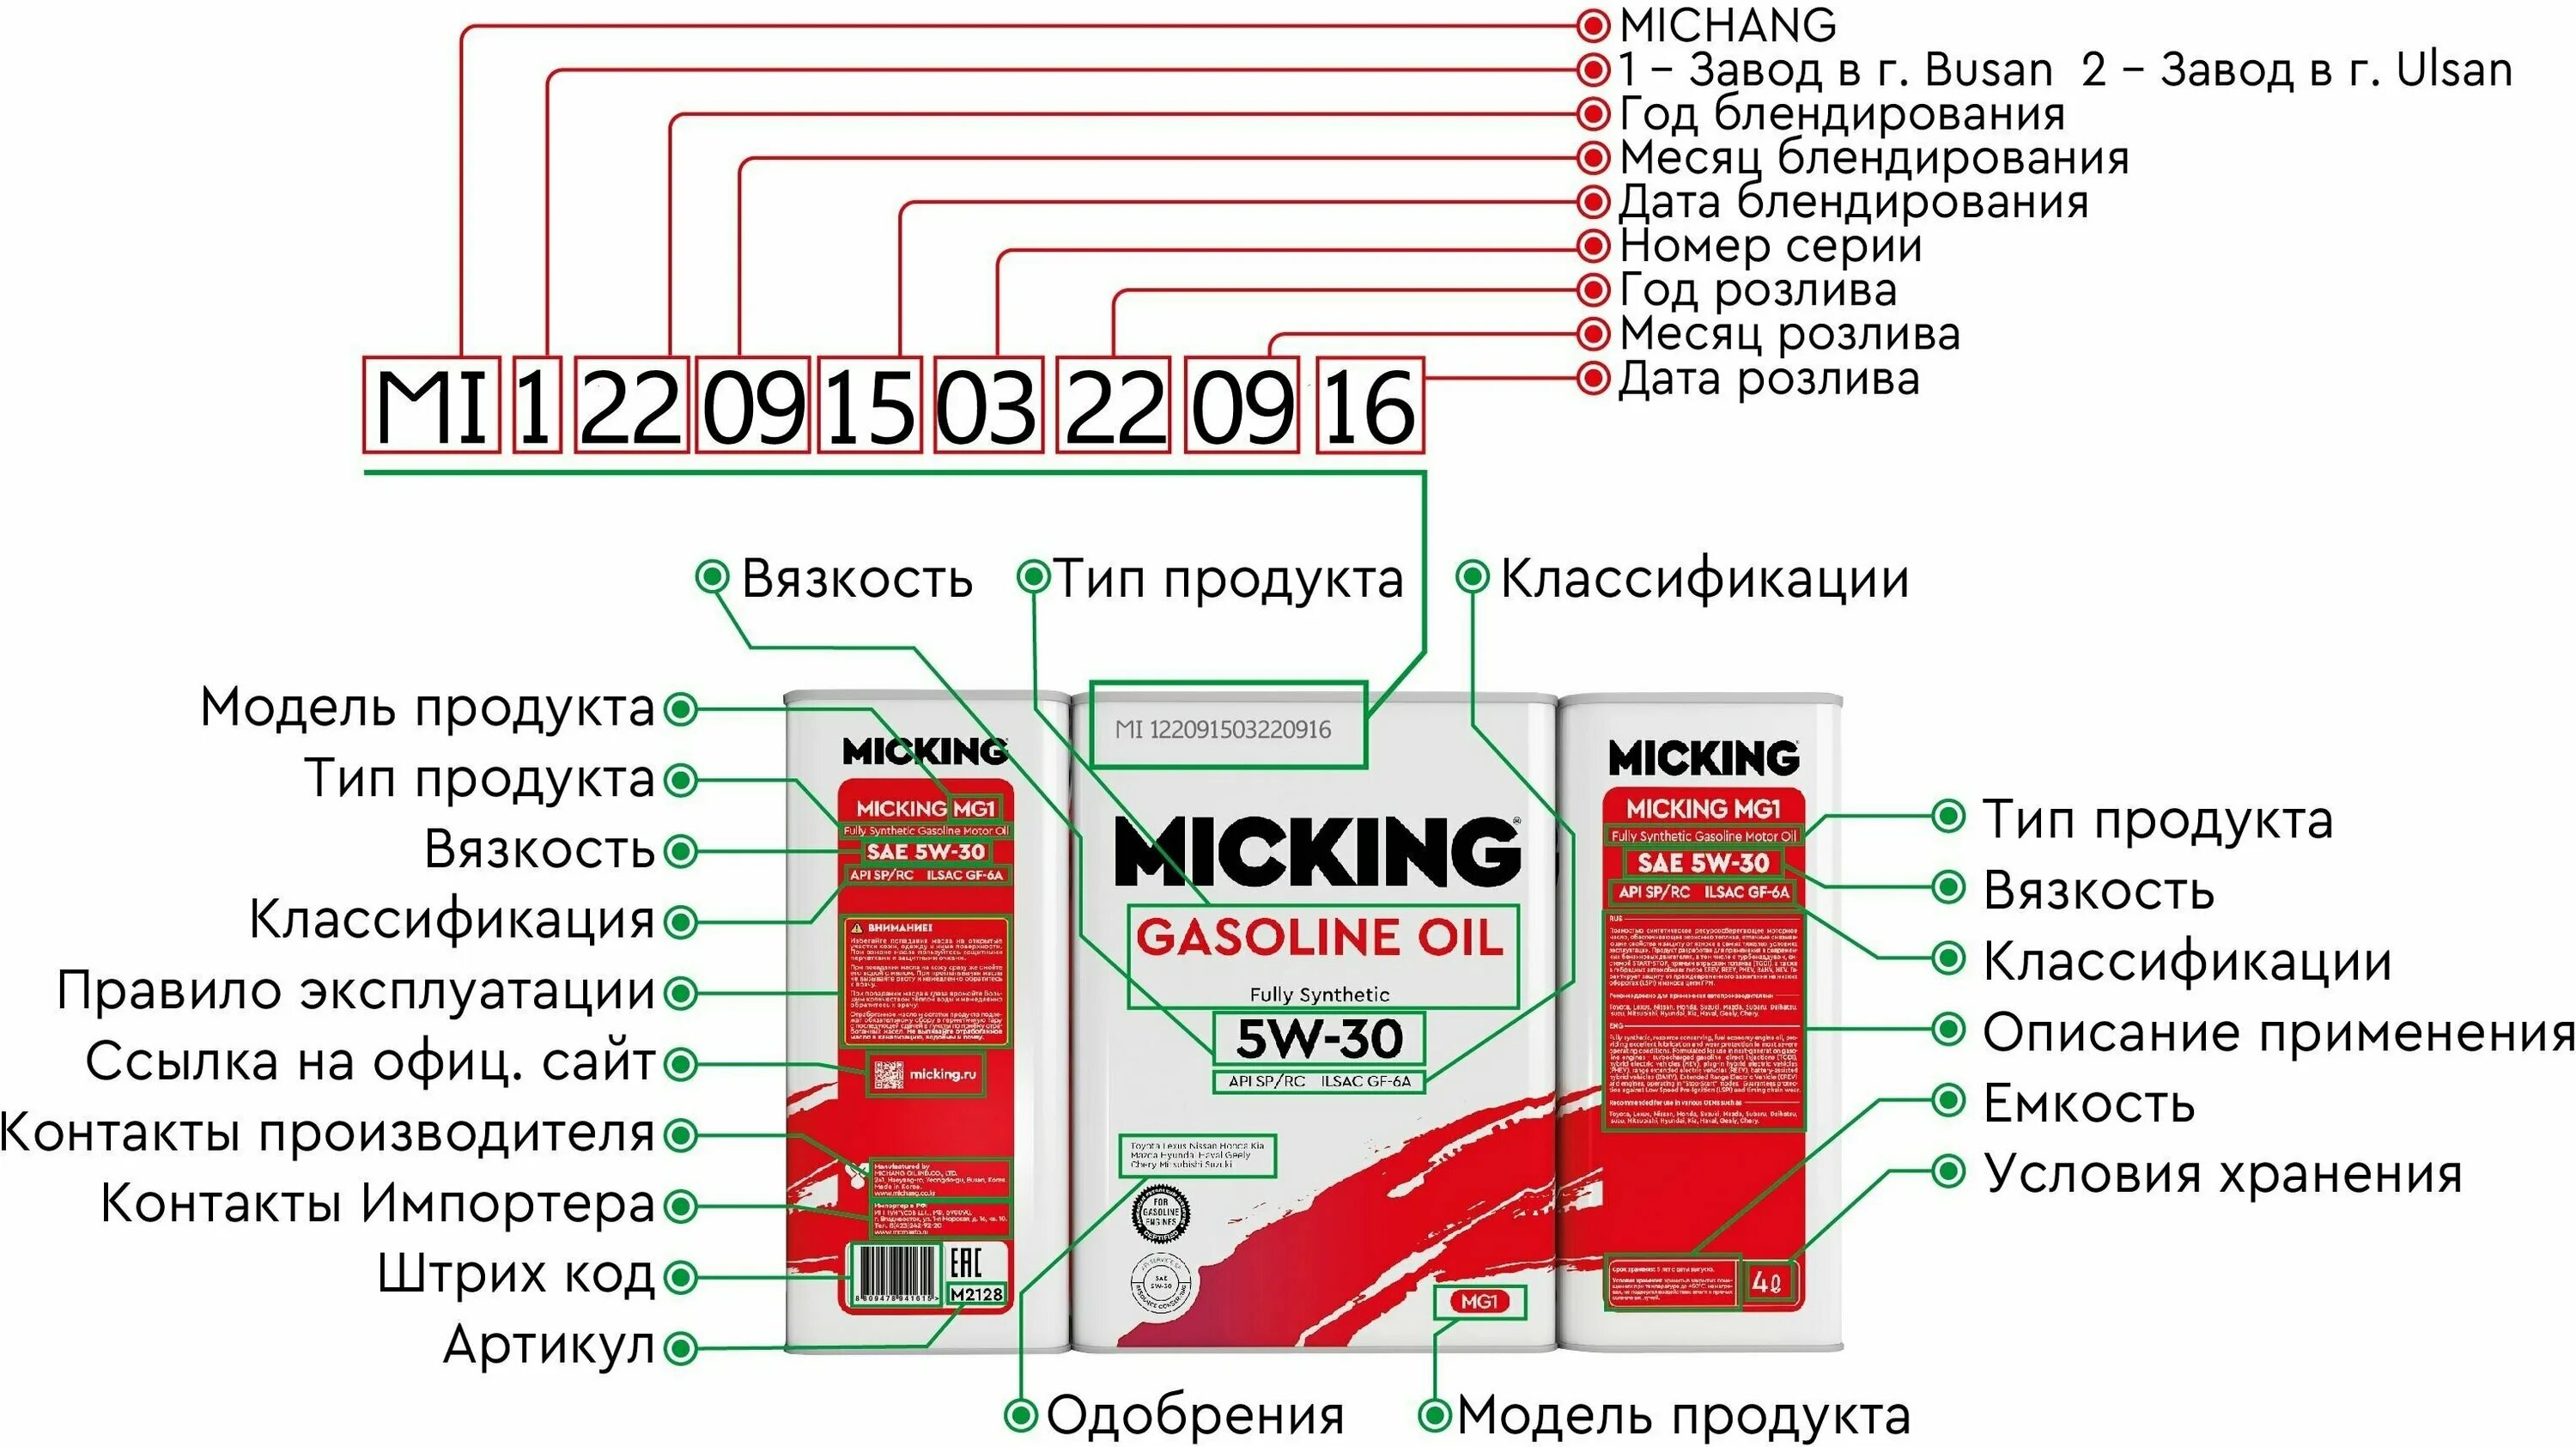 Api sp rc. Моторное масло Micking gasoline Oil mg1 5w-30 API SP/RC 1л. Обозначение масла моторного SP. SP масло моторное расшифровка. Расшифровка масла по API SP.